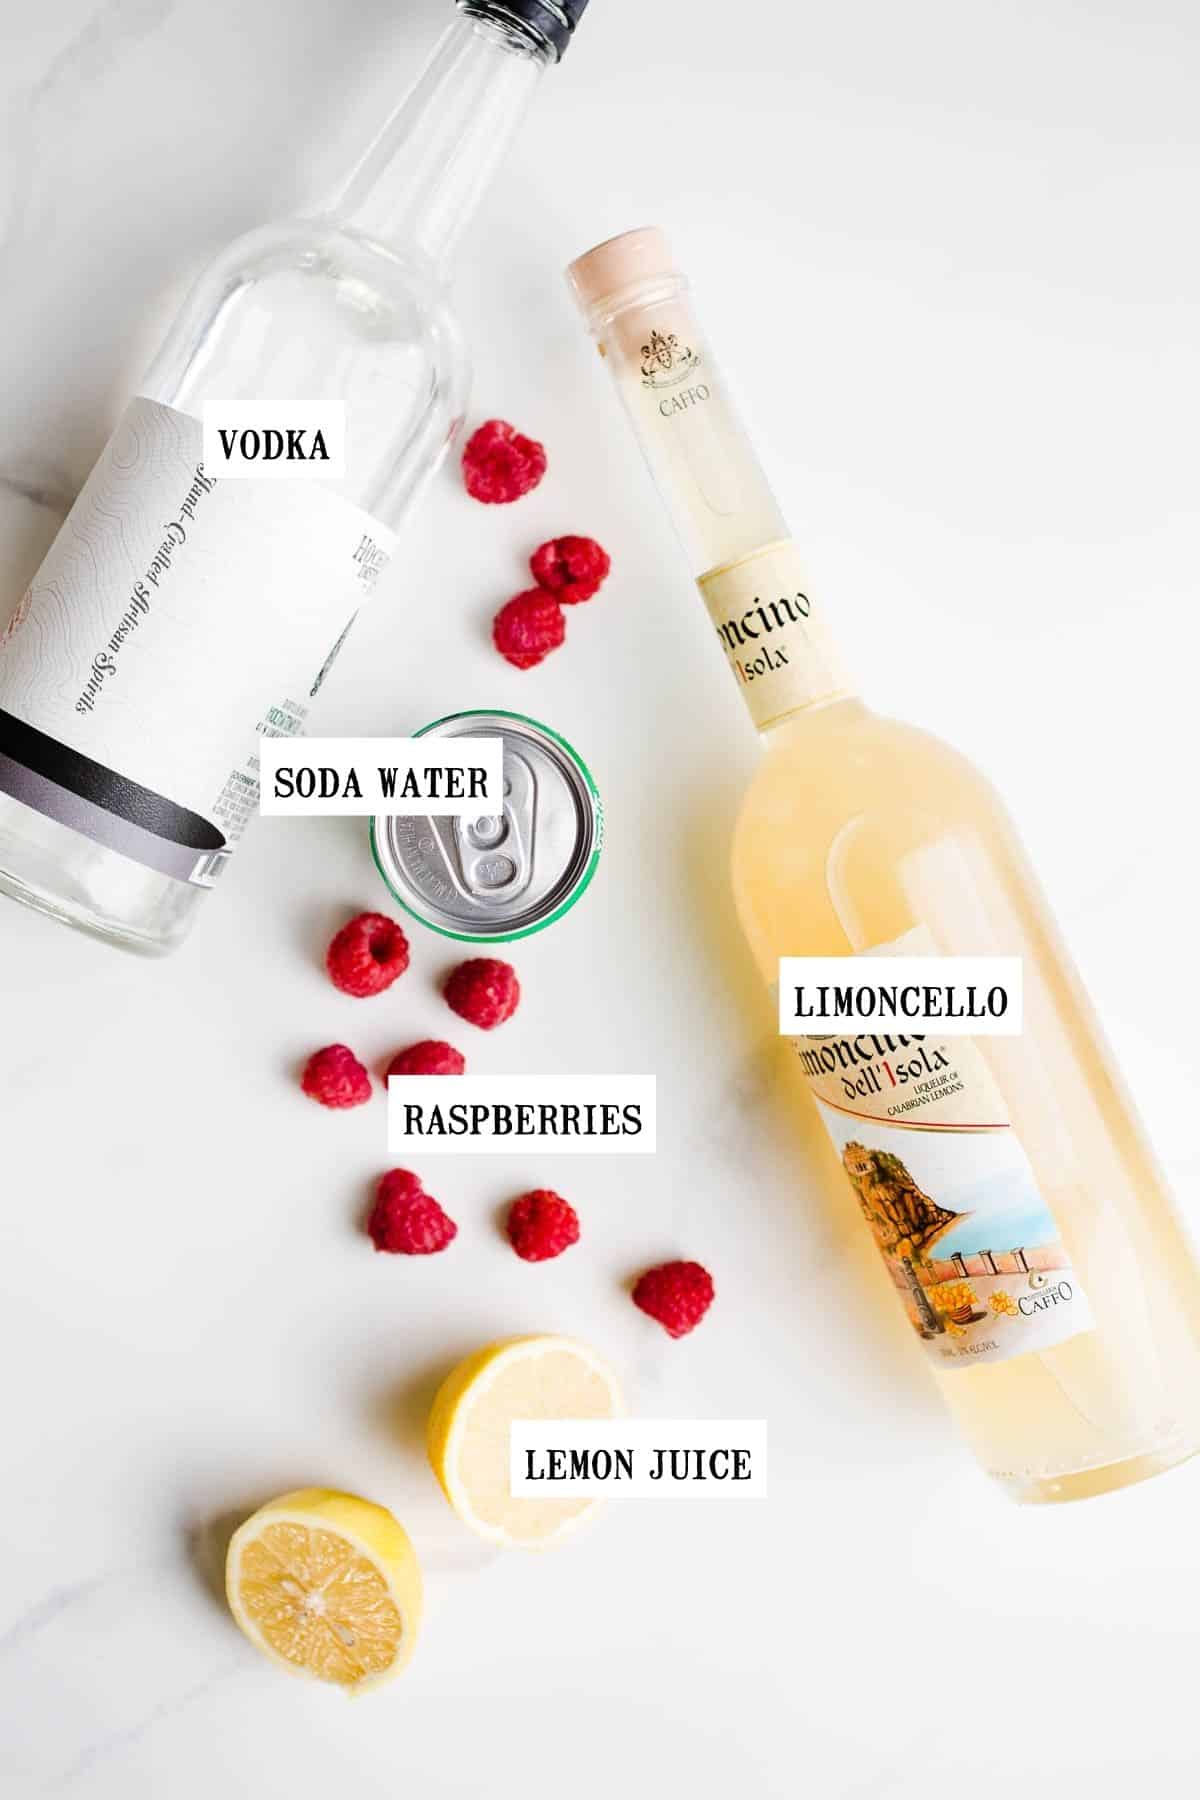 Ingredients for a limoncello cocktail on a white surface. 